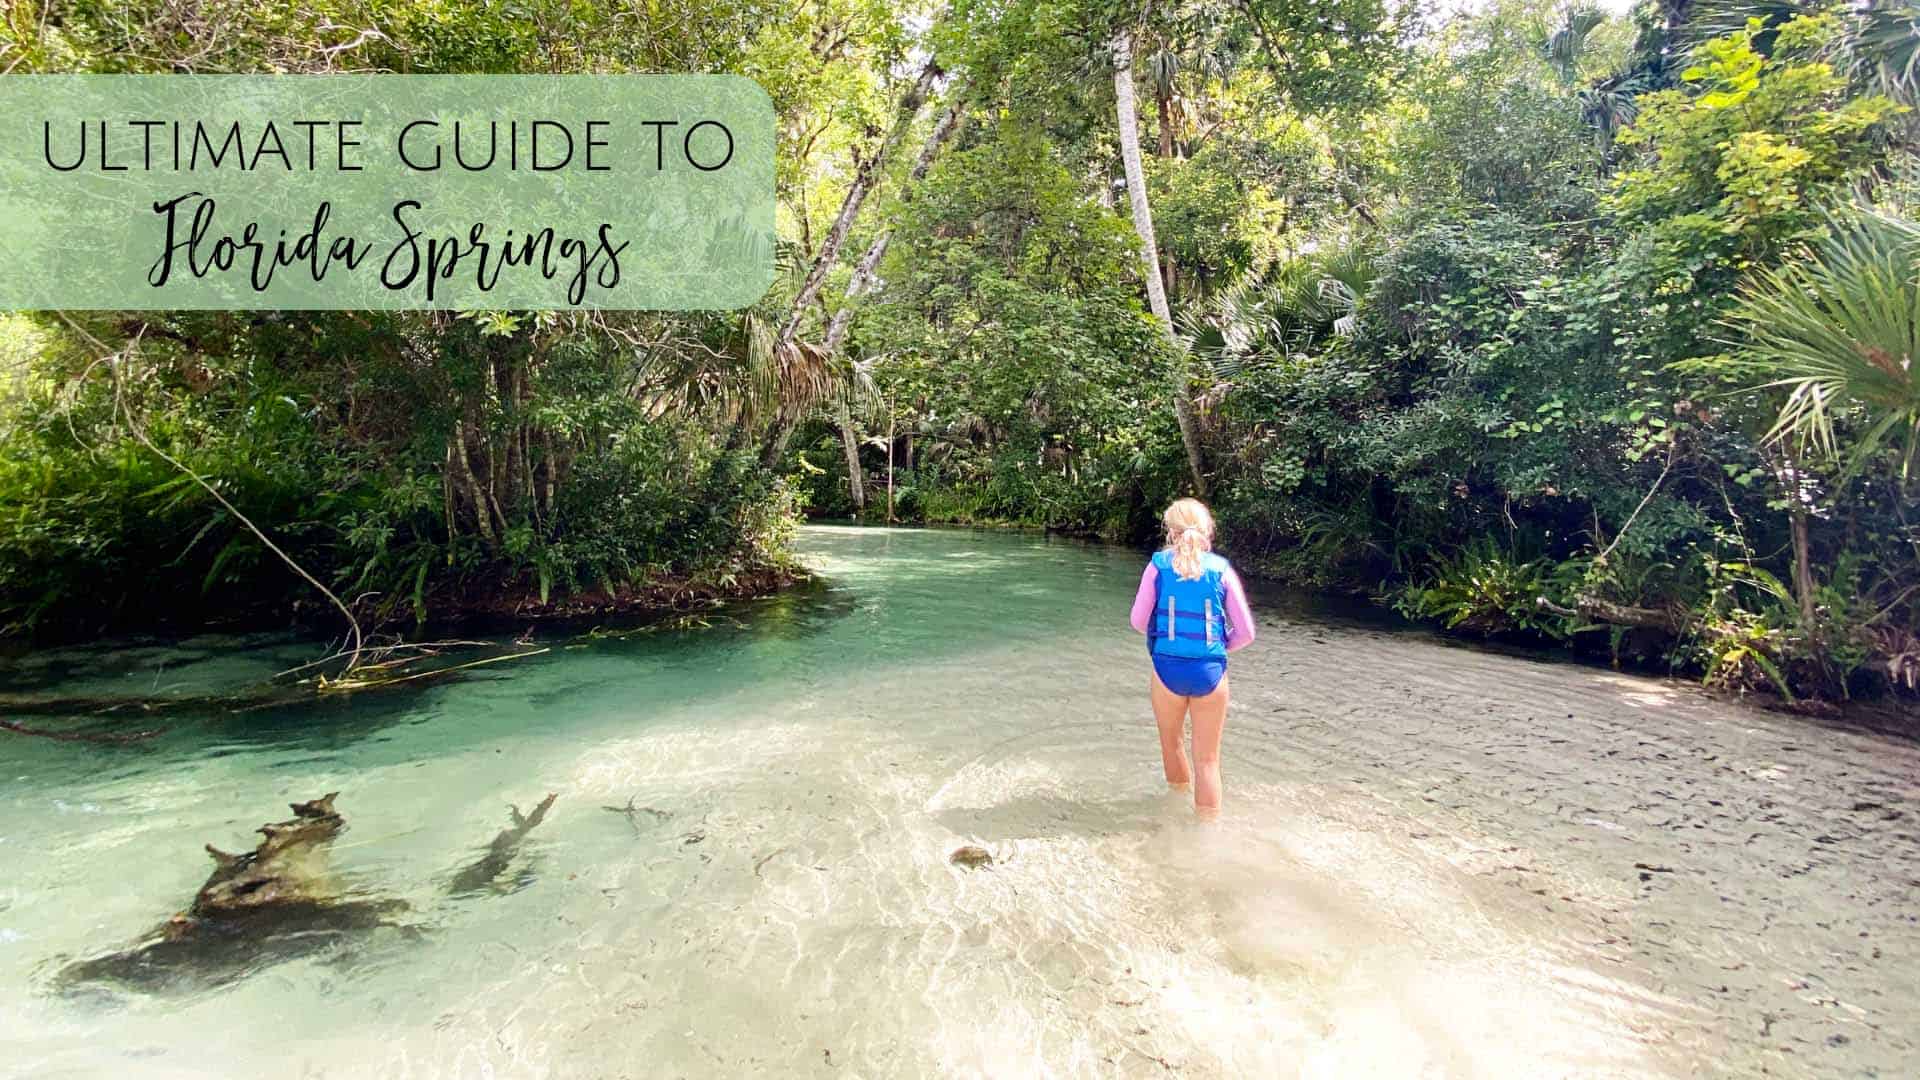 Florida Springs Day Trips From